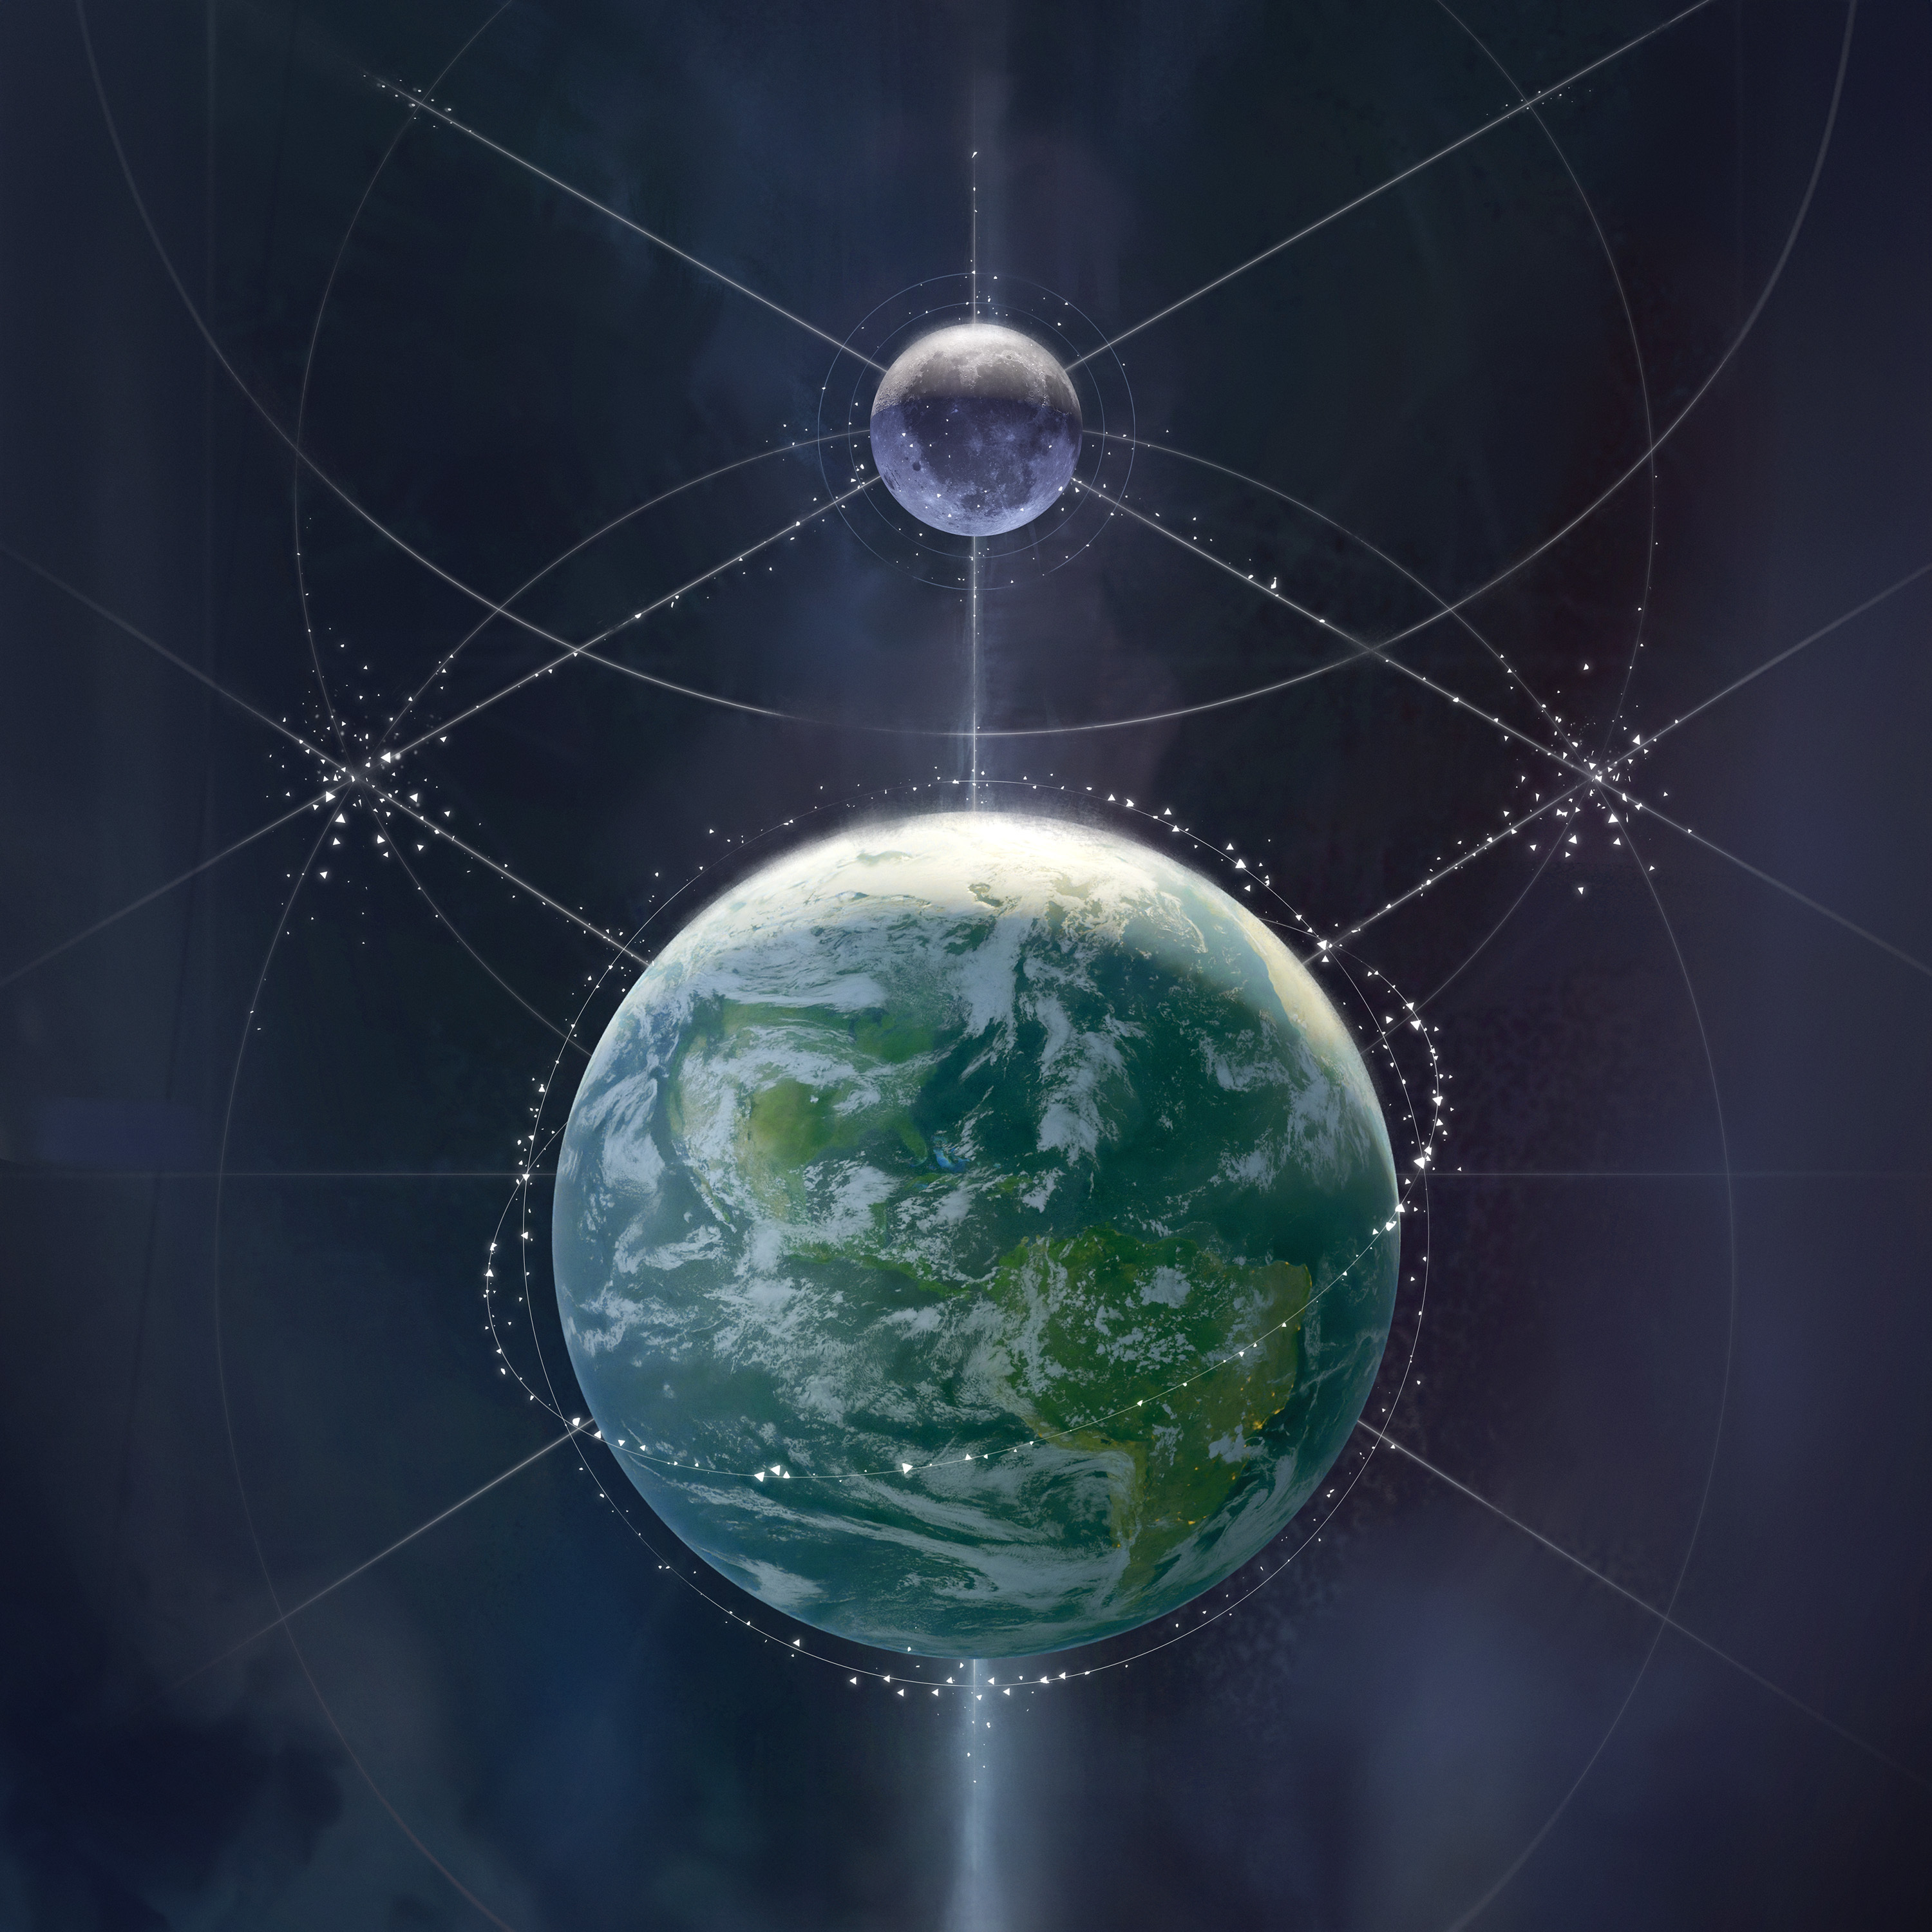 An illustration of Earth and the Moon with faint lines connecting them and stretching out in various directions, like a network